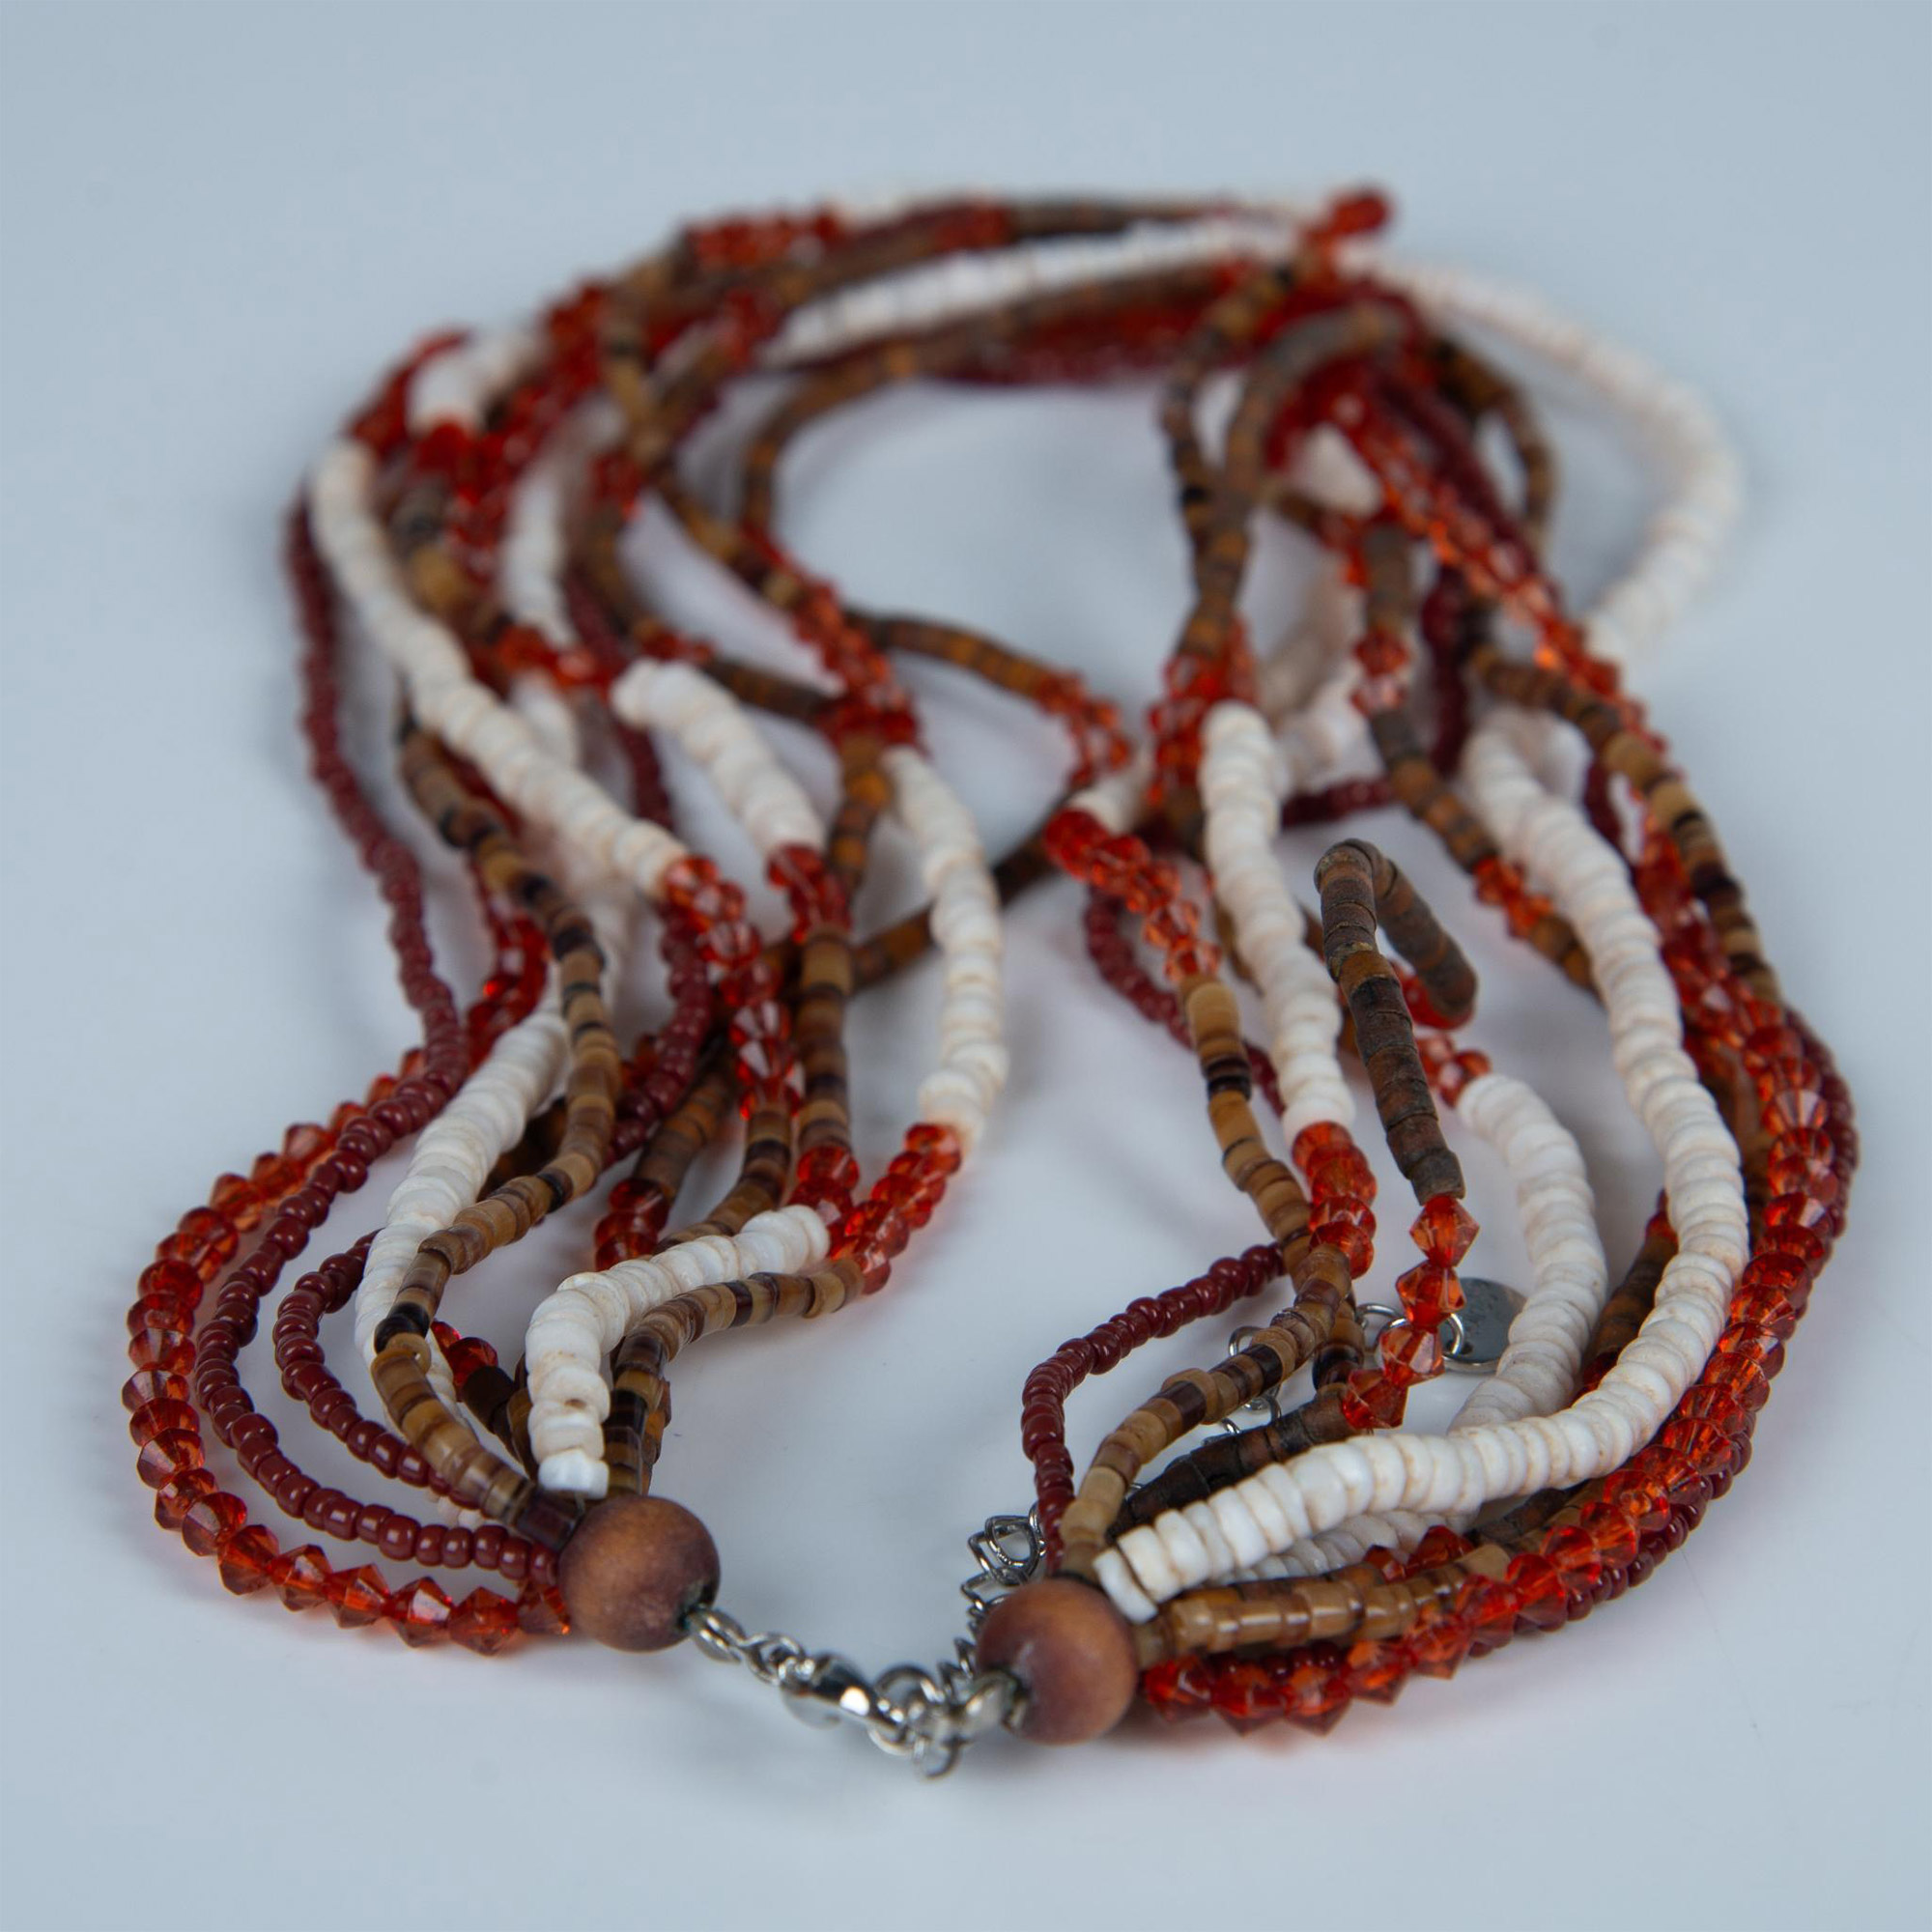 Unique Multistrand Bead Necklace - Image 3 of 3